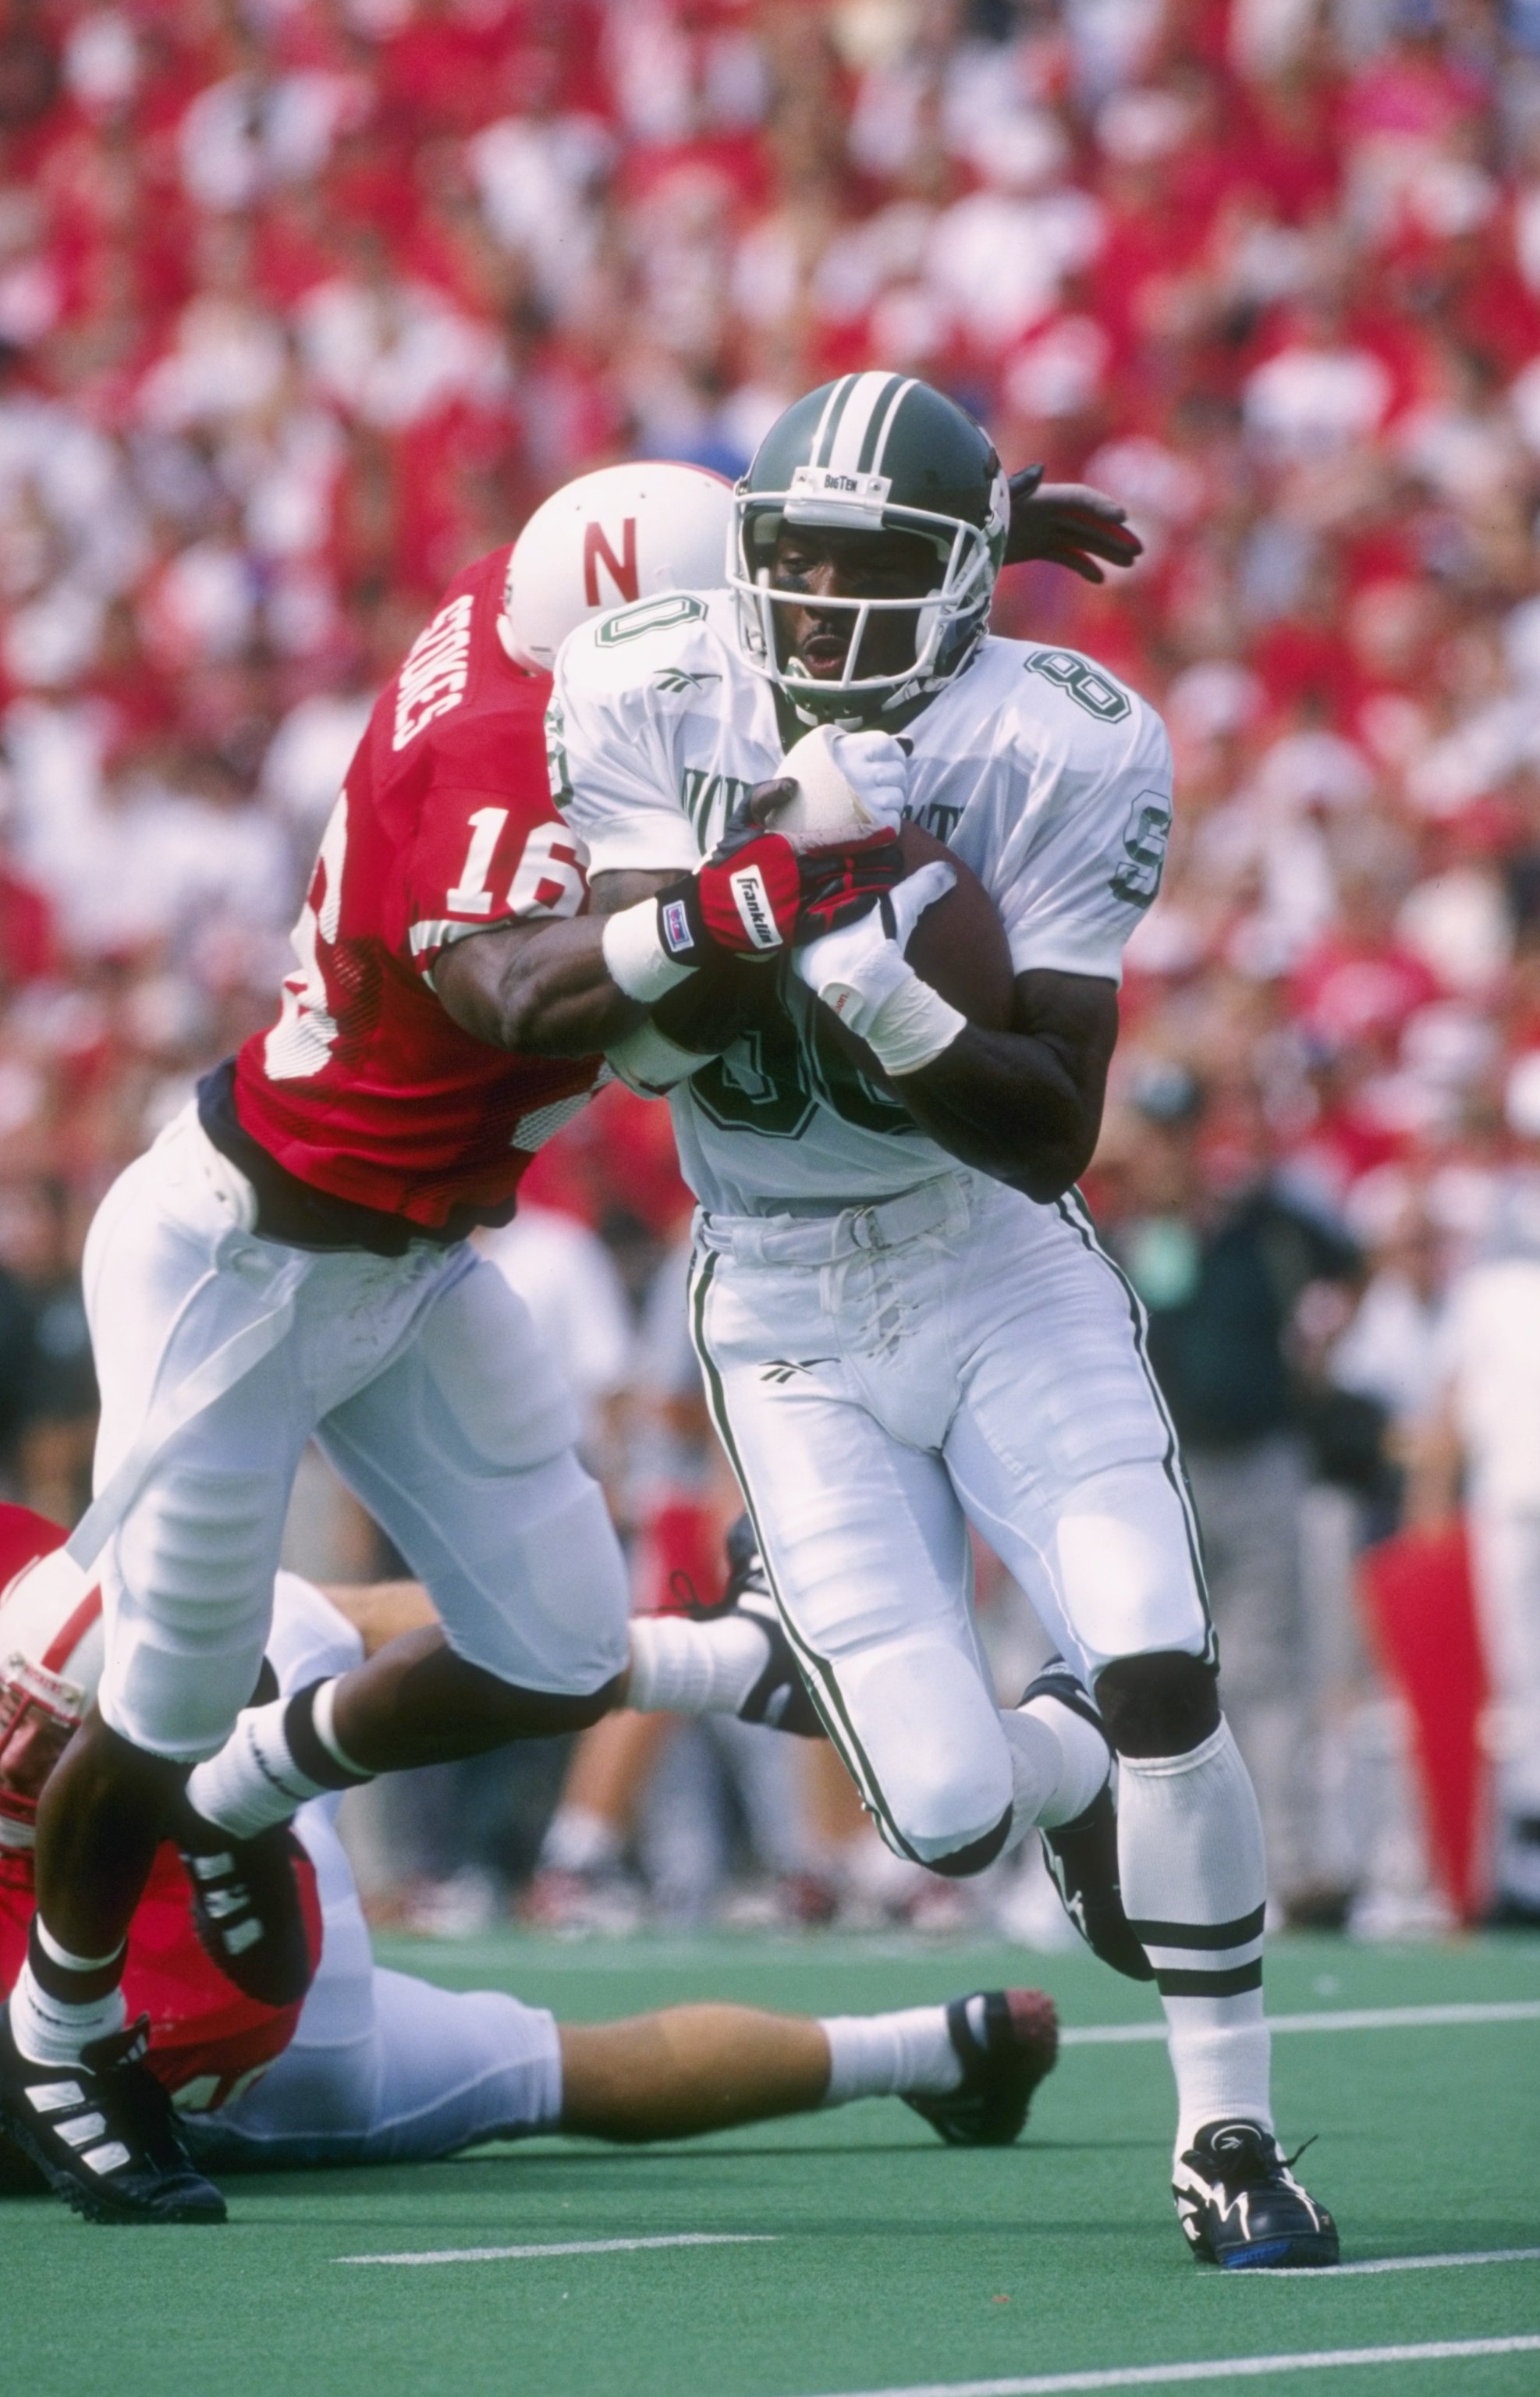 7 Sep 1996:  Wide receiver Derrick Mason of the Michigan State Spartans attempts to break free from the grasp of defensive back Eric Stokes of the Nebraska Cornhuskers during a reception in the Spartans 55-14 loss to the Cornhuskers at Memorial Stadium in